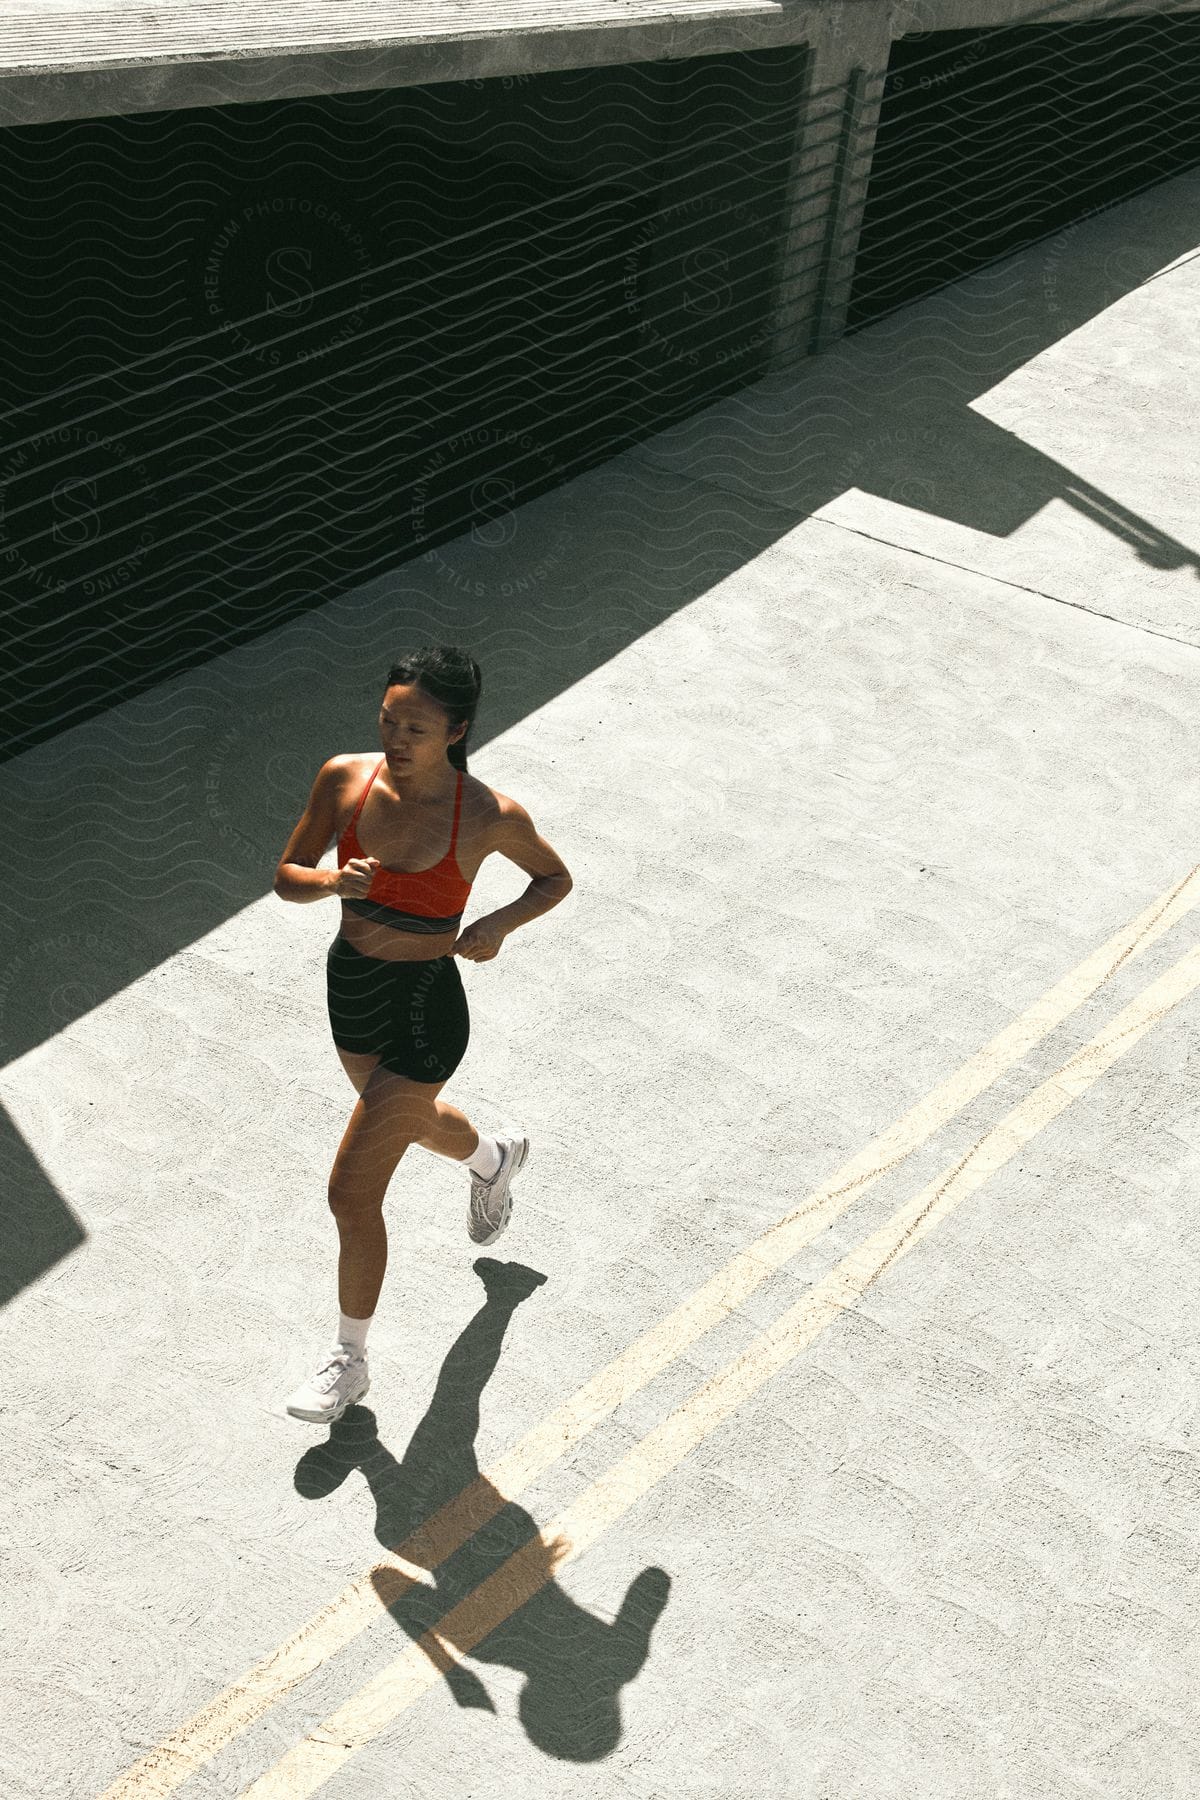 A woman with a ponytail, red top, and black shorts runs down the street under the shining sun.